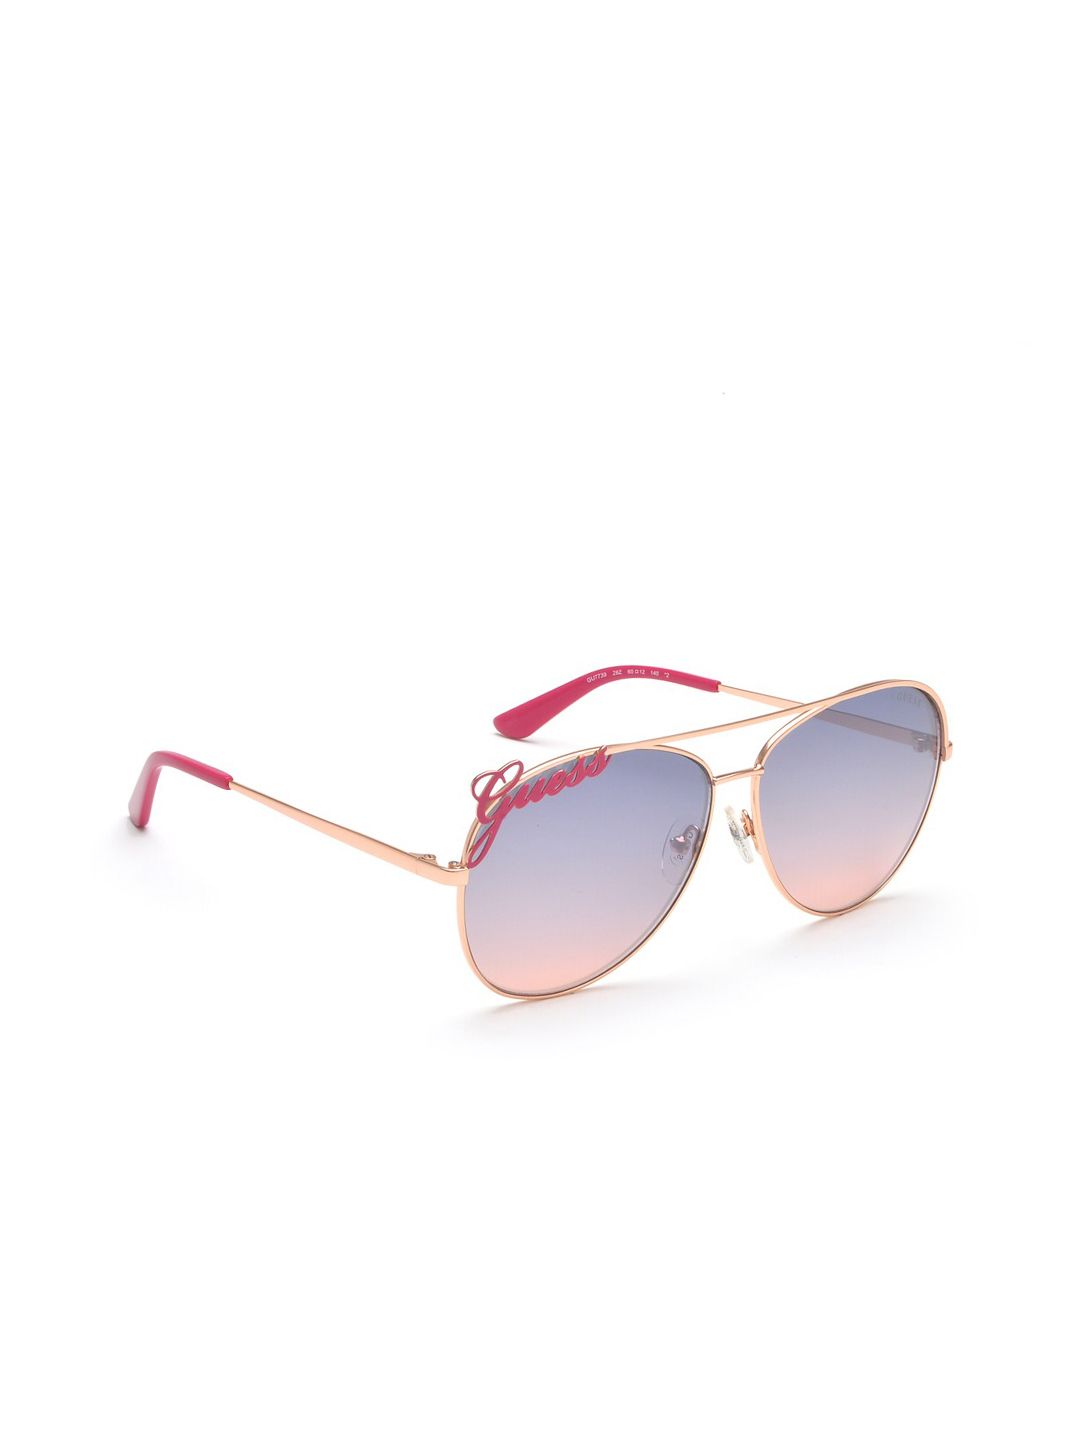 GUESS Women Blue Lens & Gold-Toned Aviator Sunglasses with Polarised Lens Price in India